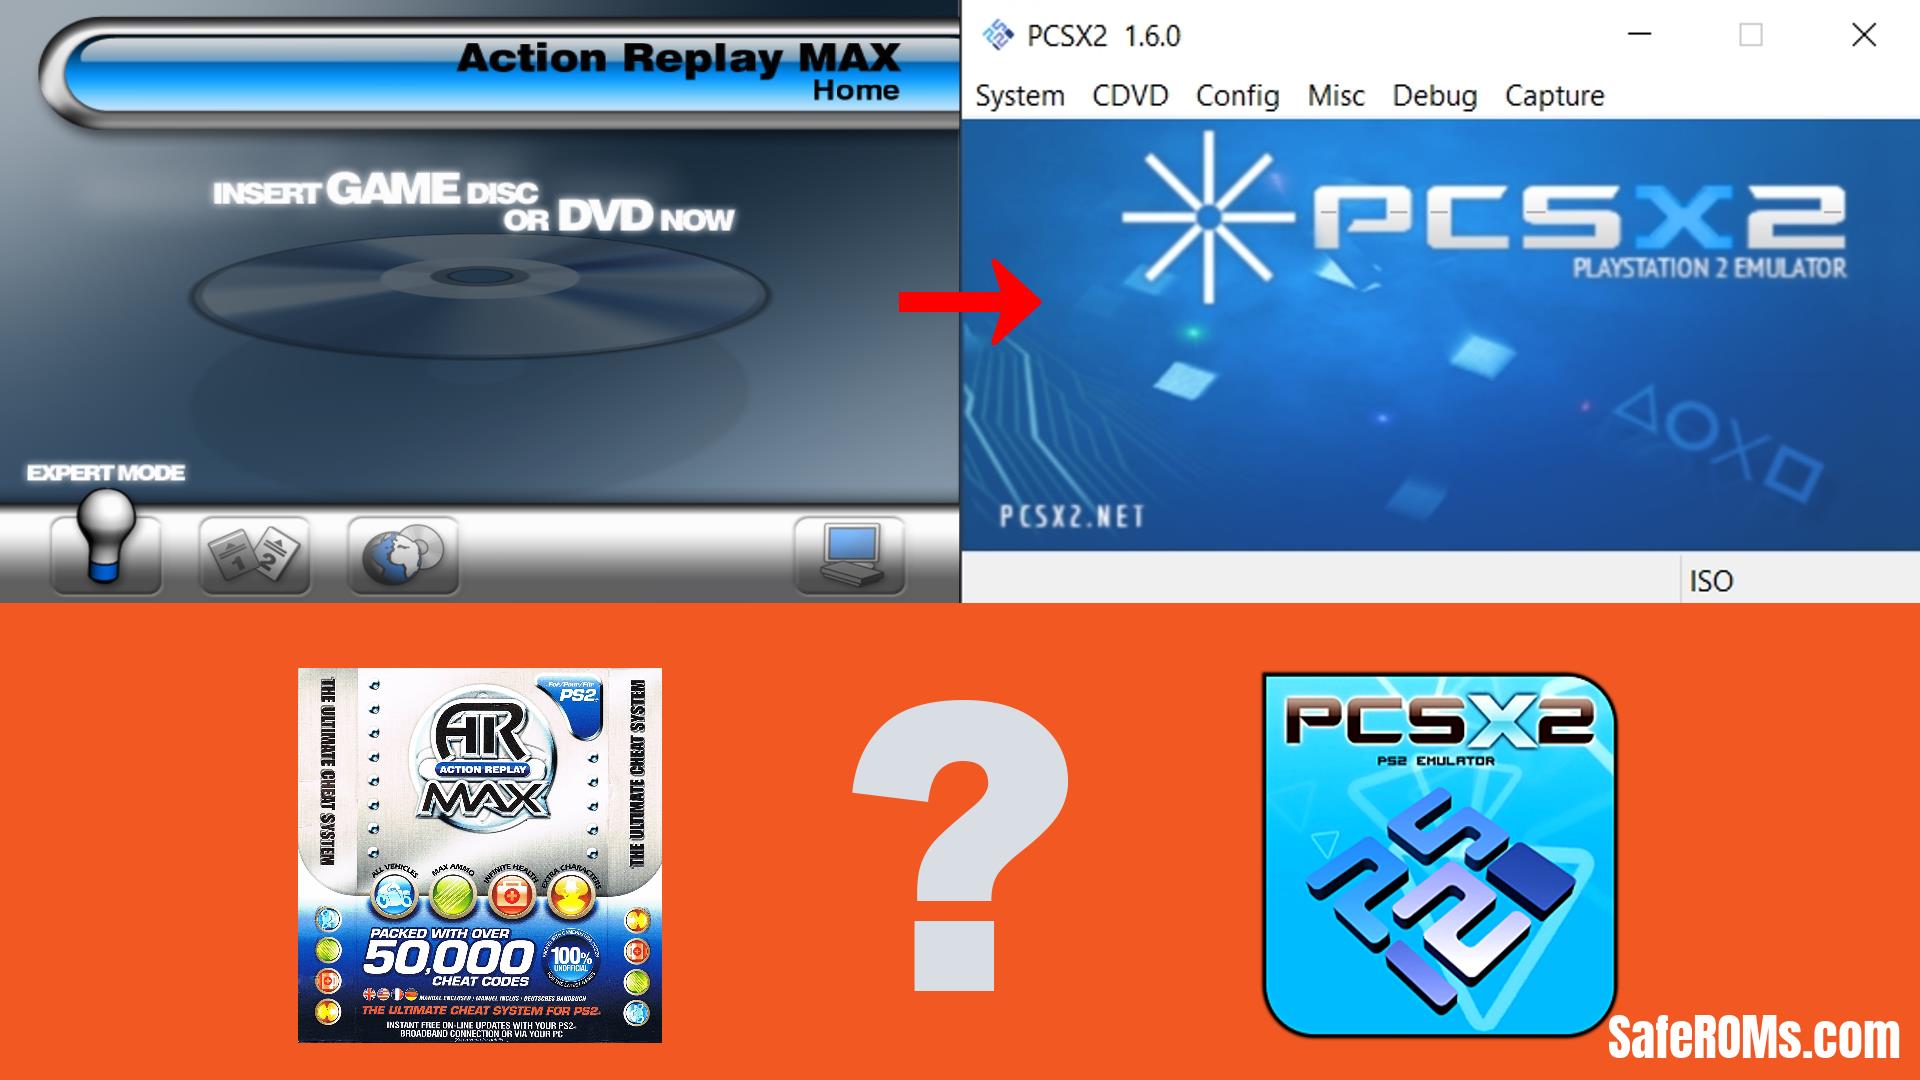 How To Use Action Replay Max On Pcsx2 2021 Saferoms